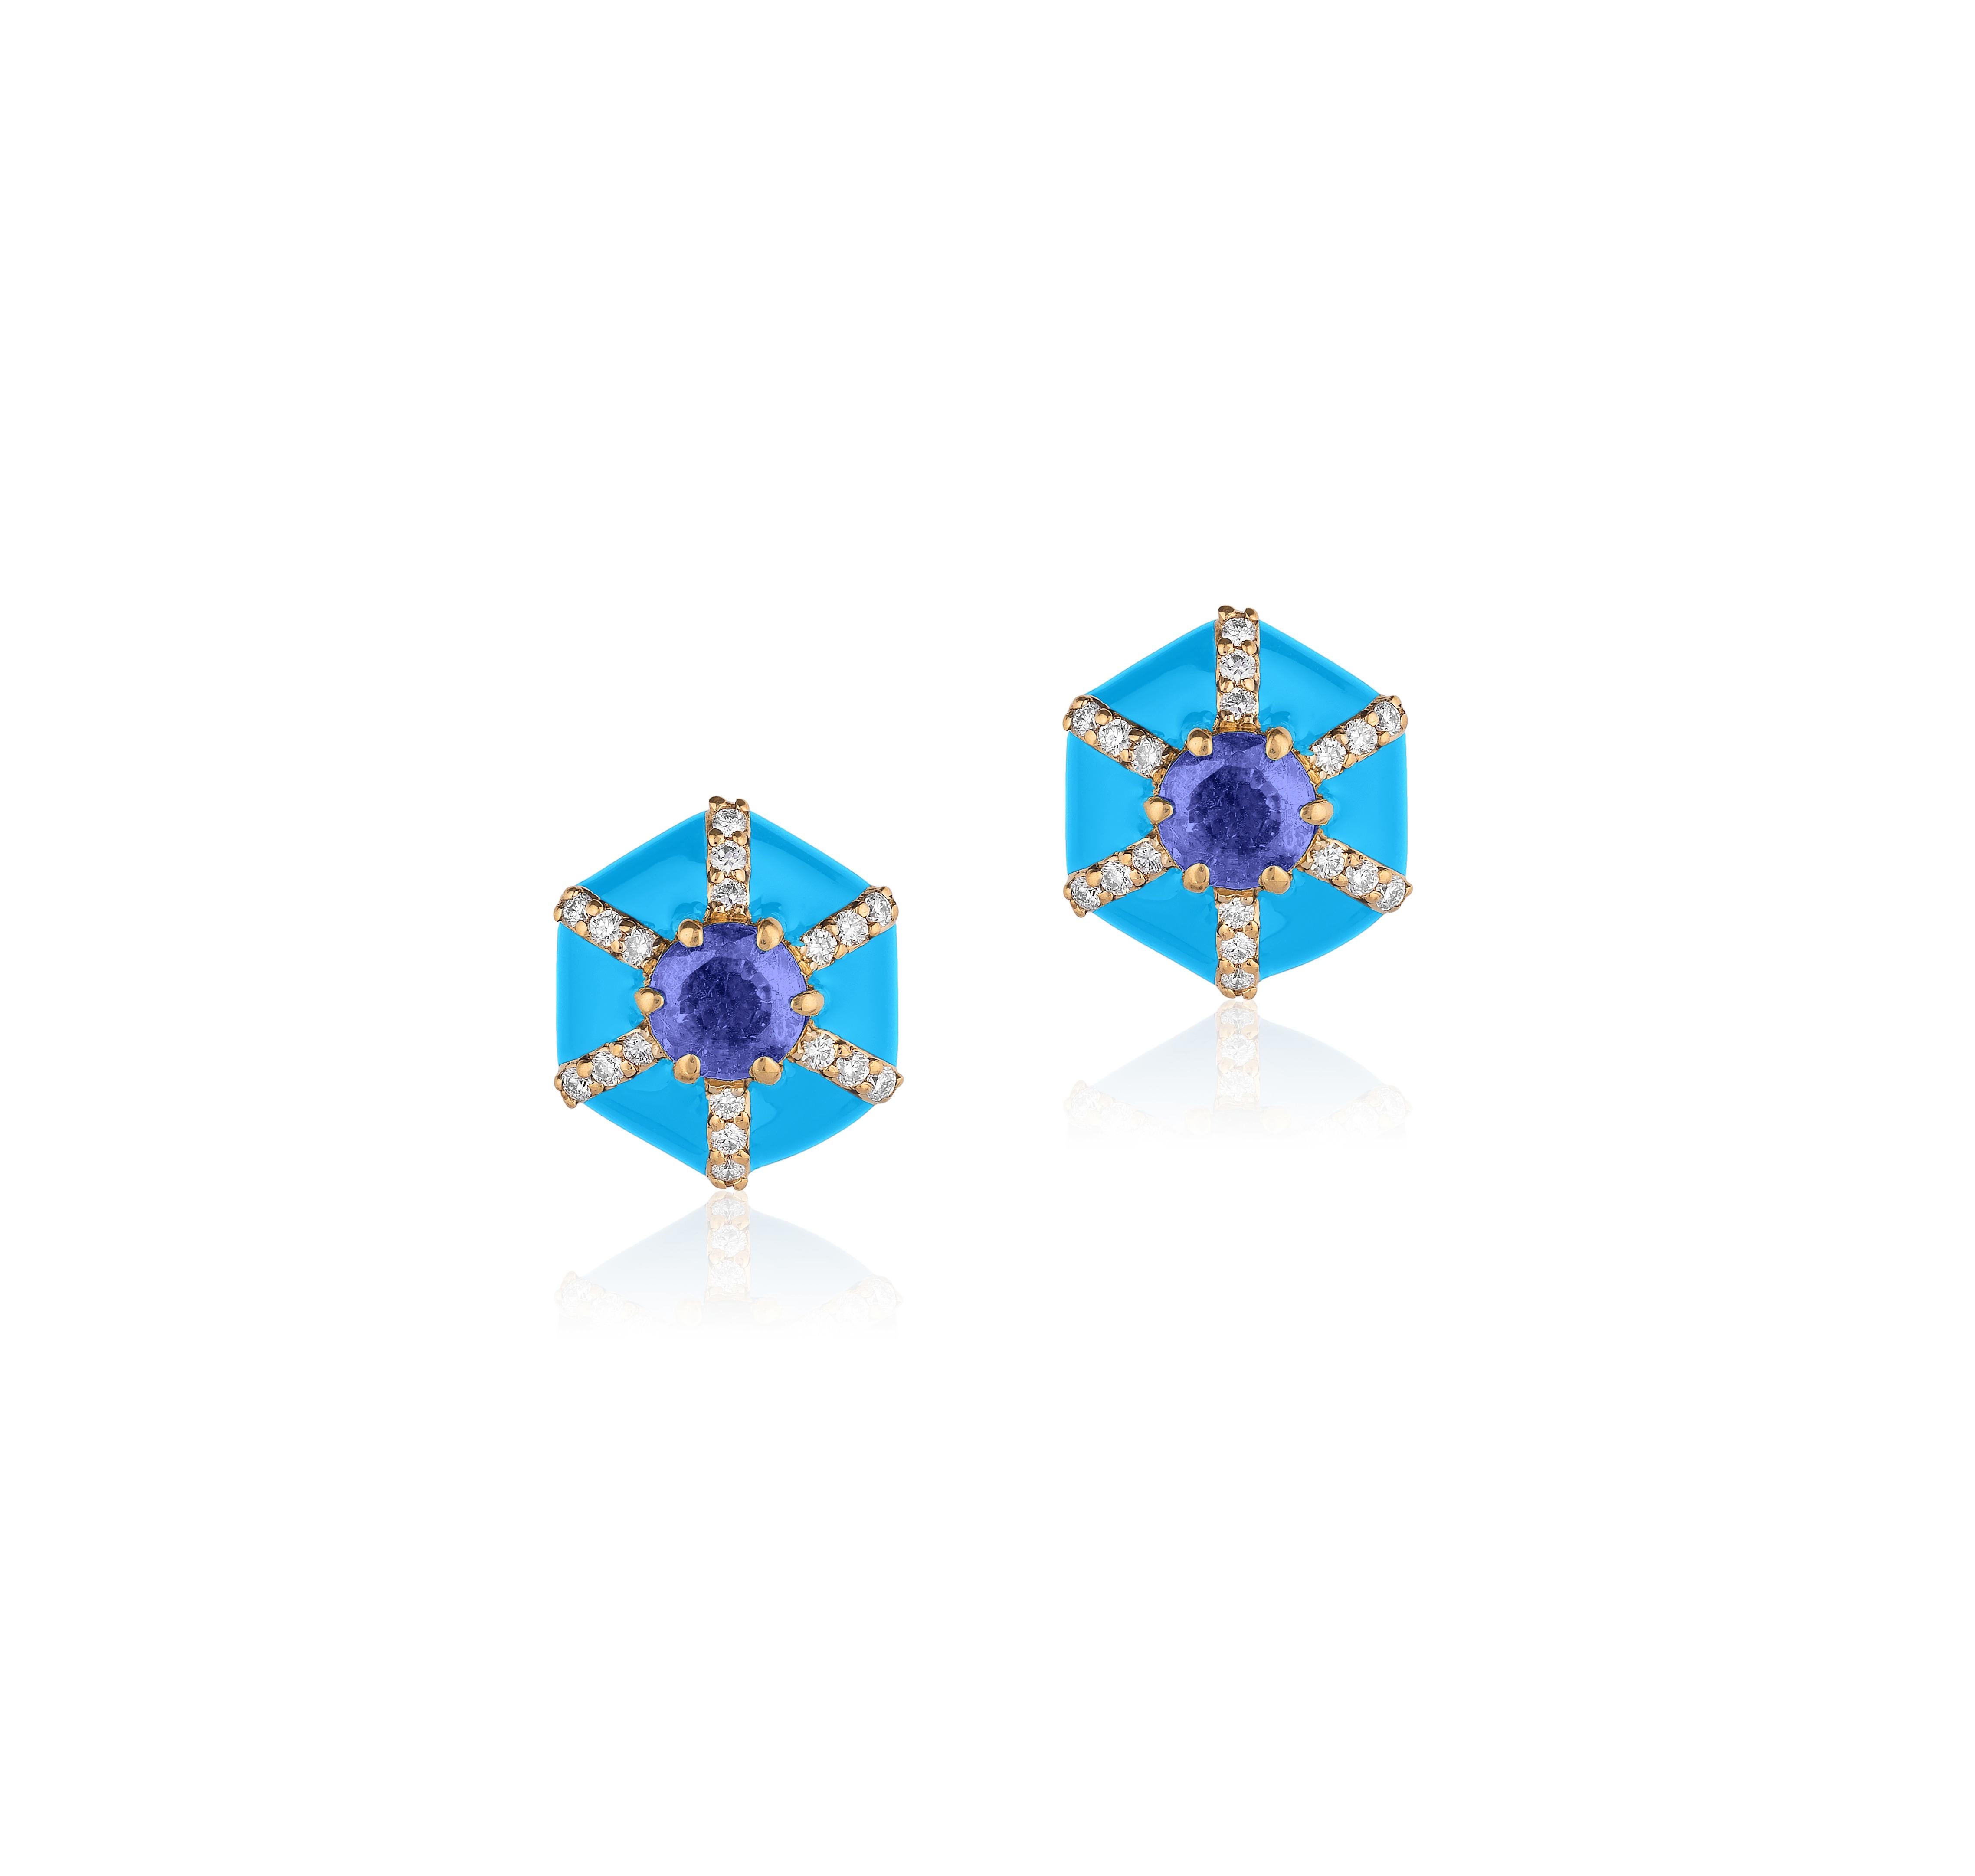 Turquoise Enamel Stud Earrings with Sapphire and Diamonds in 18K Yellow Gold from 'Queen' Collection
Stone Size: 4 mm
Gemstone Approx. Wt: Sapphire- 0.50 Carats 
Diamonds: G-H / VS, Approx. Wt: 0.12 Carats